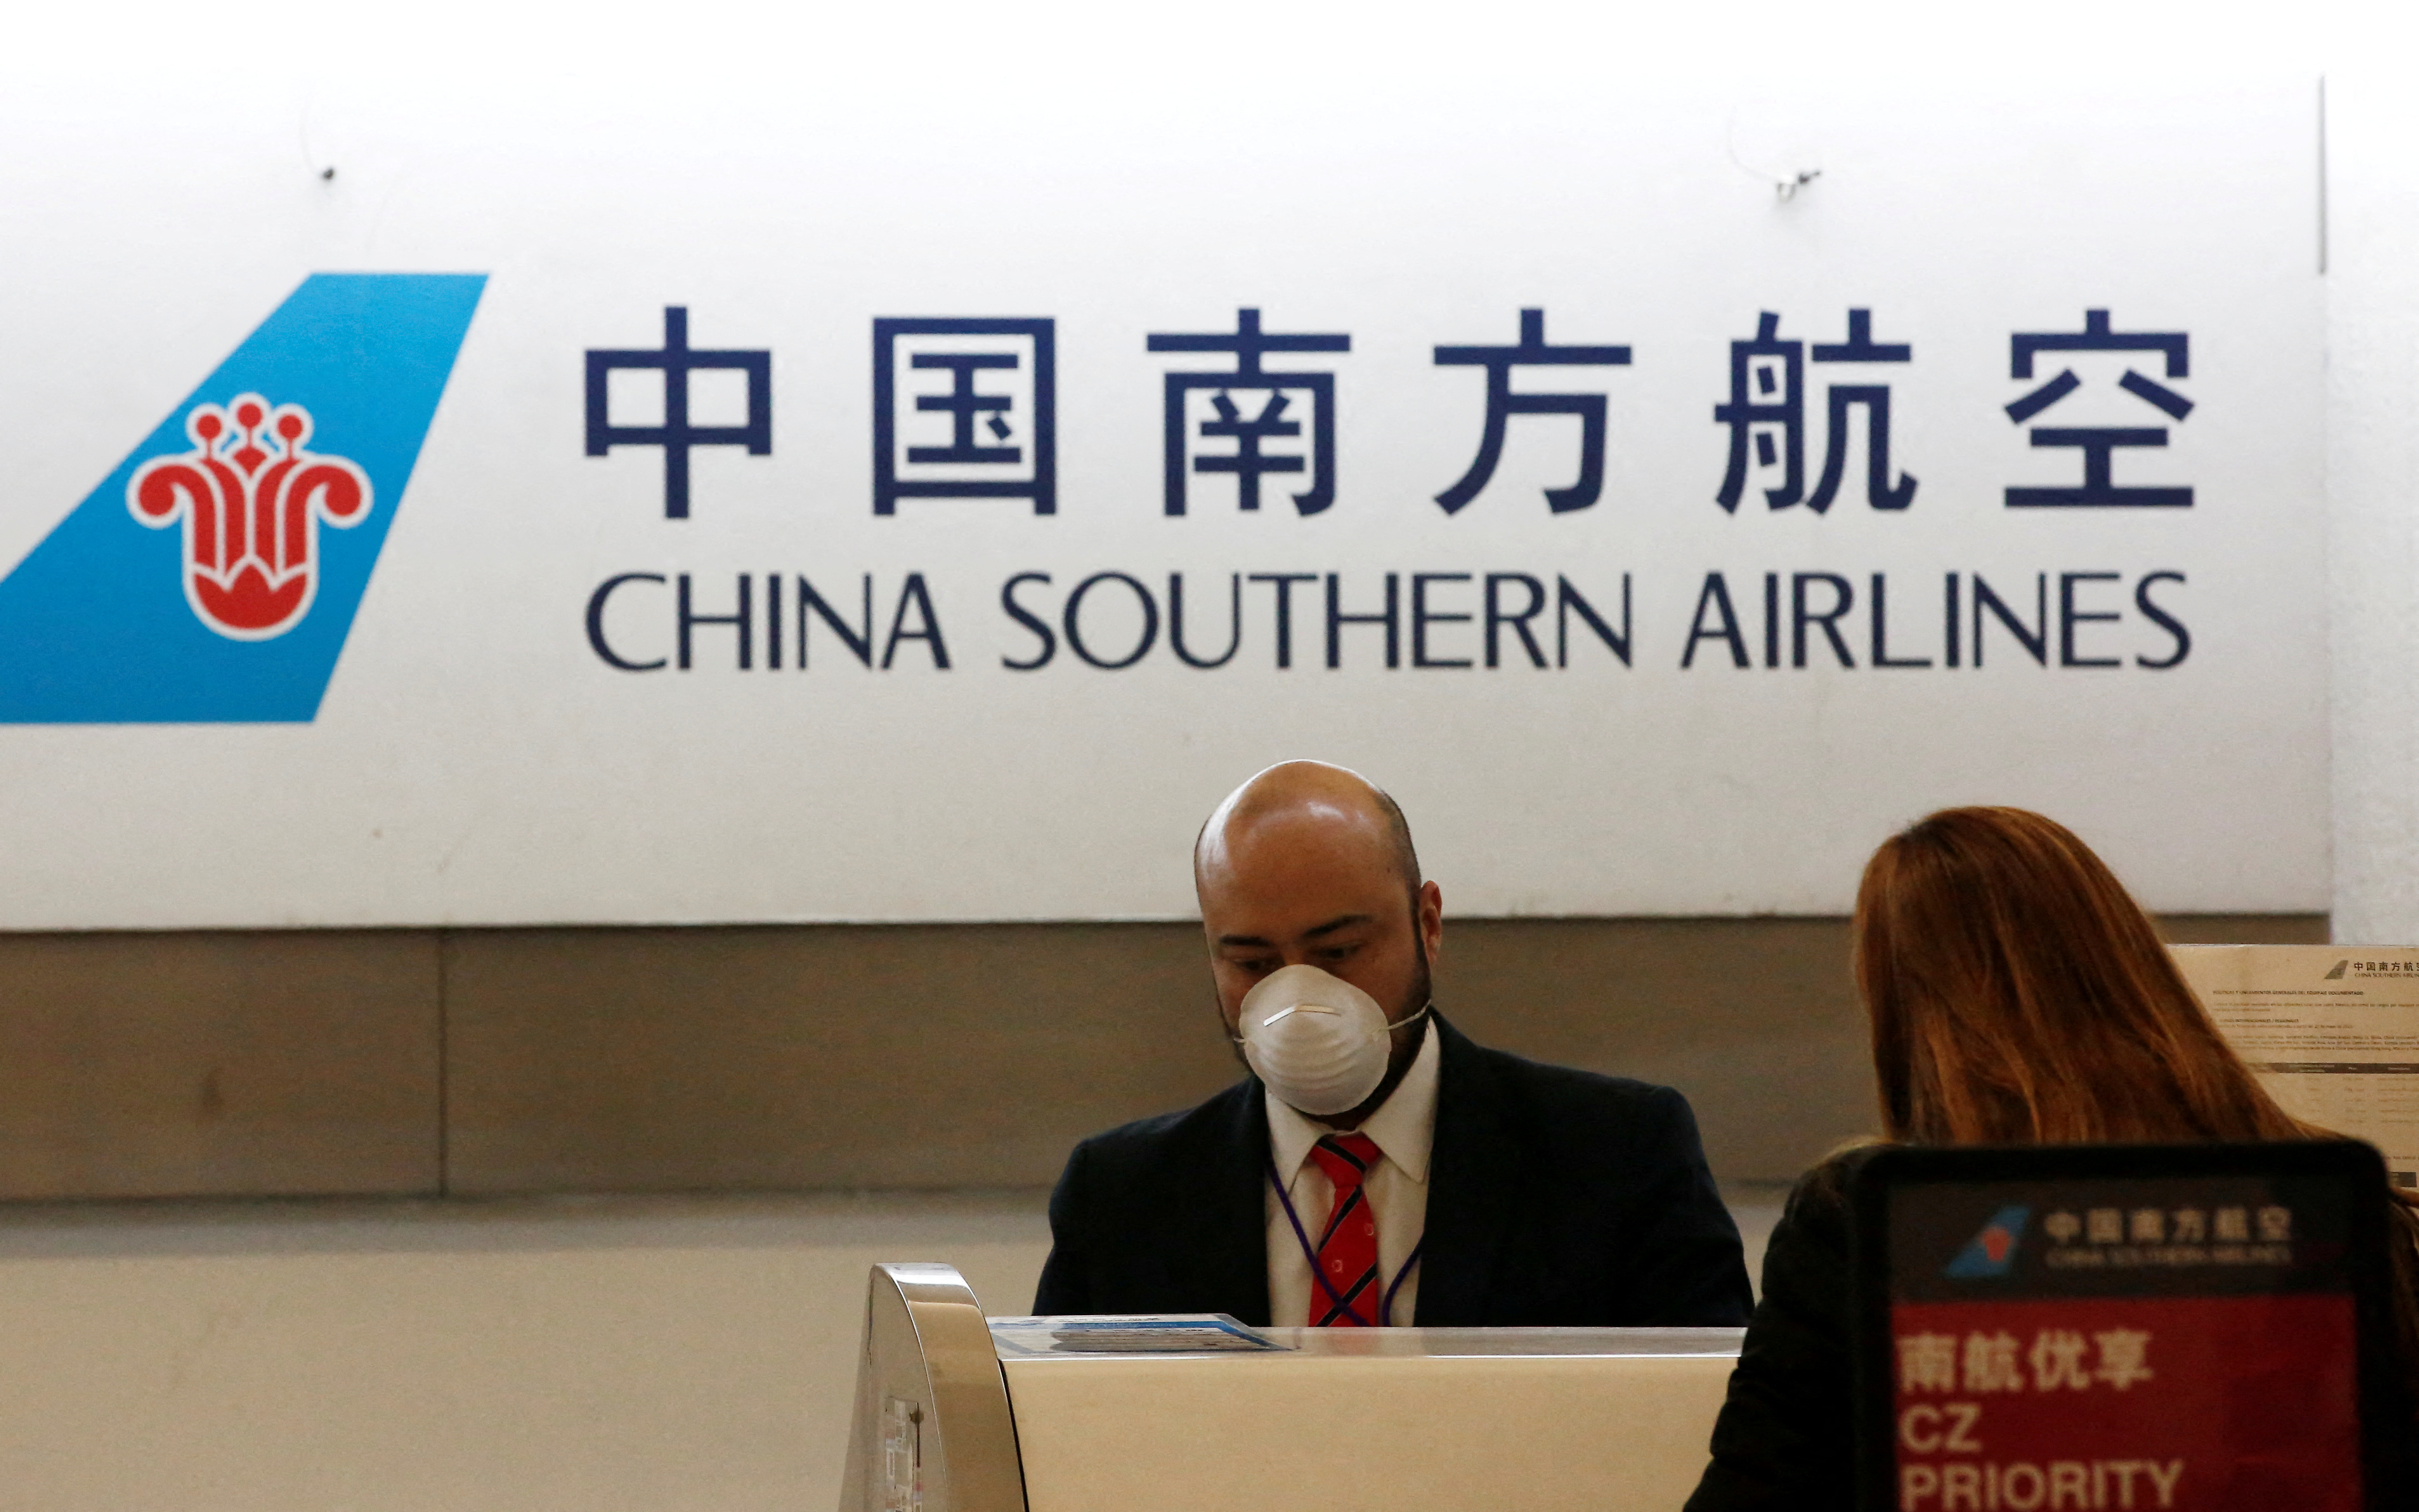 A China Southern Airlines employee wears a surgical mask as a preventive measure in light of the coronavirus outbreak in China, while he attends a customer behind the counter at Benito Juarez international airport in Mexico City